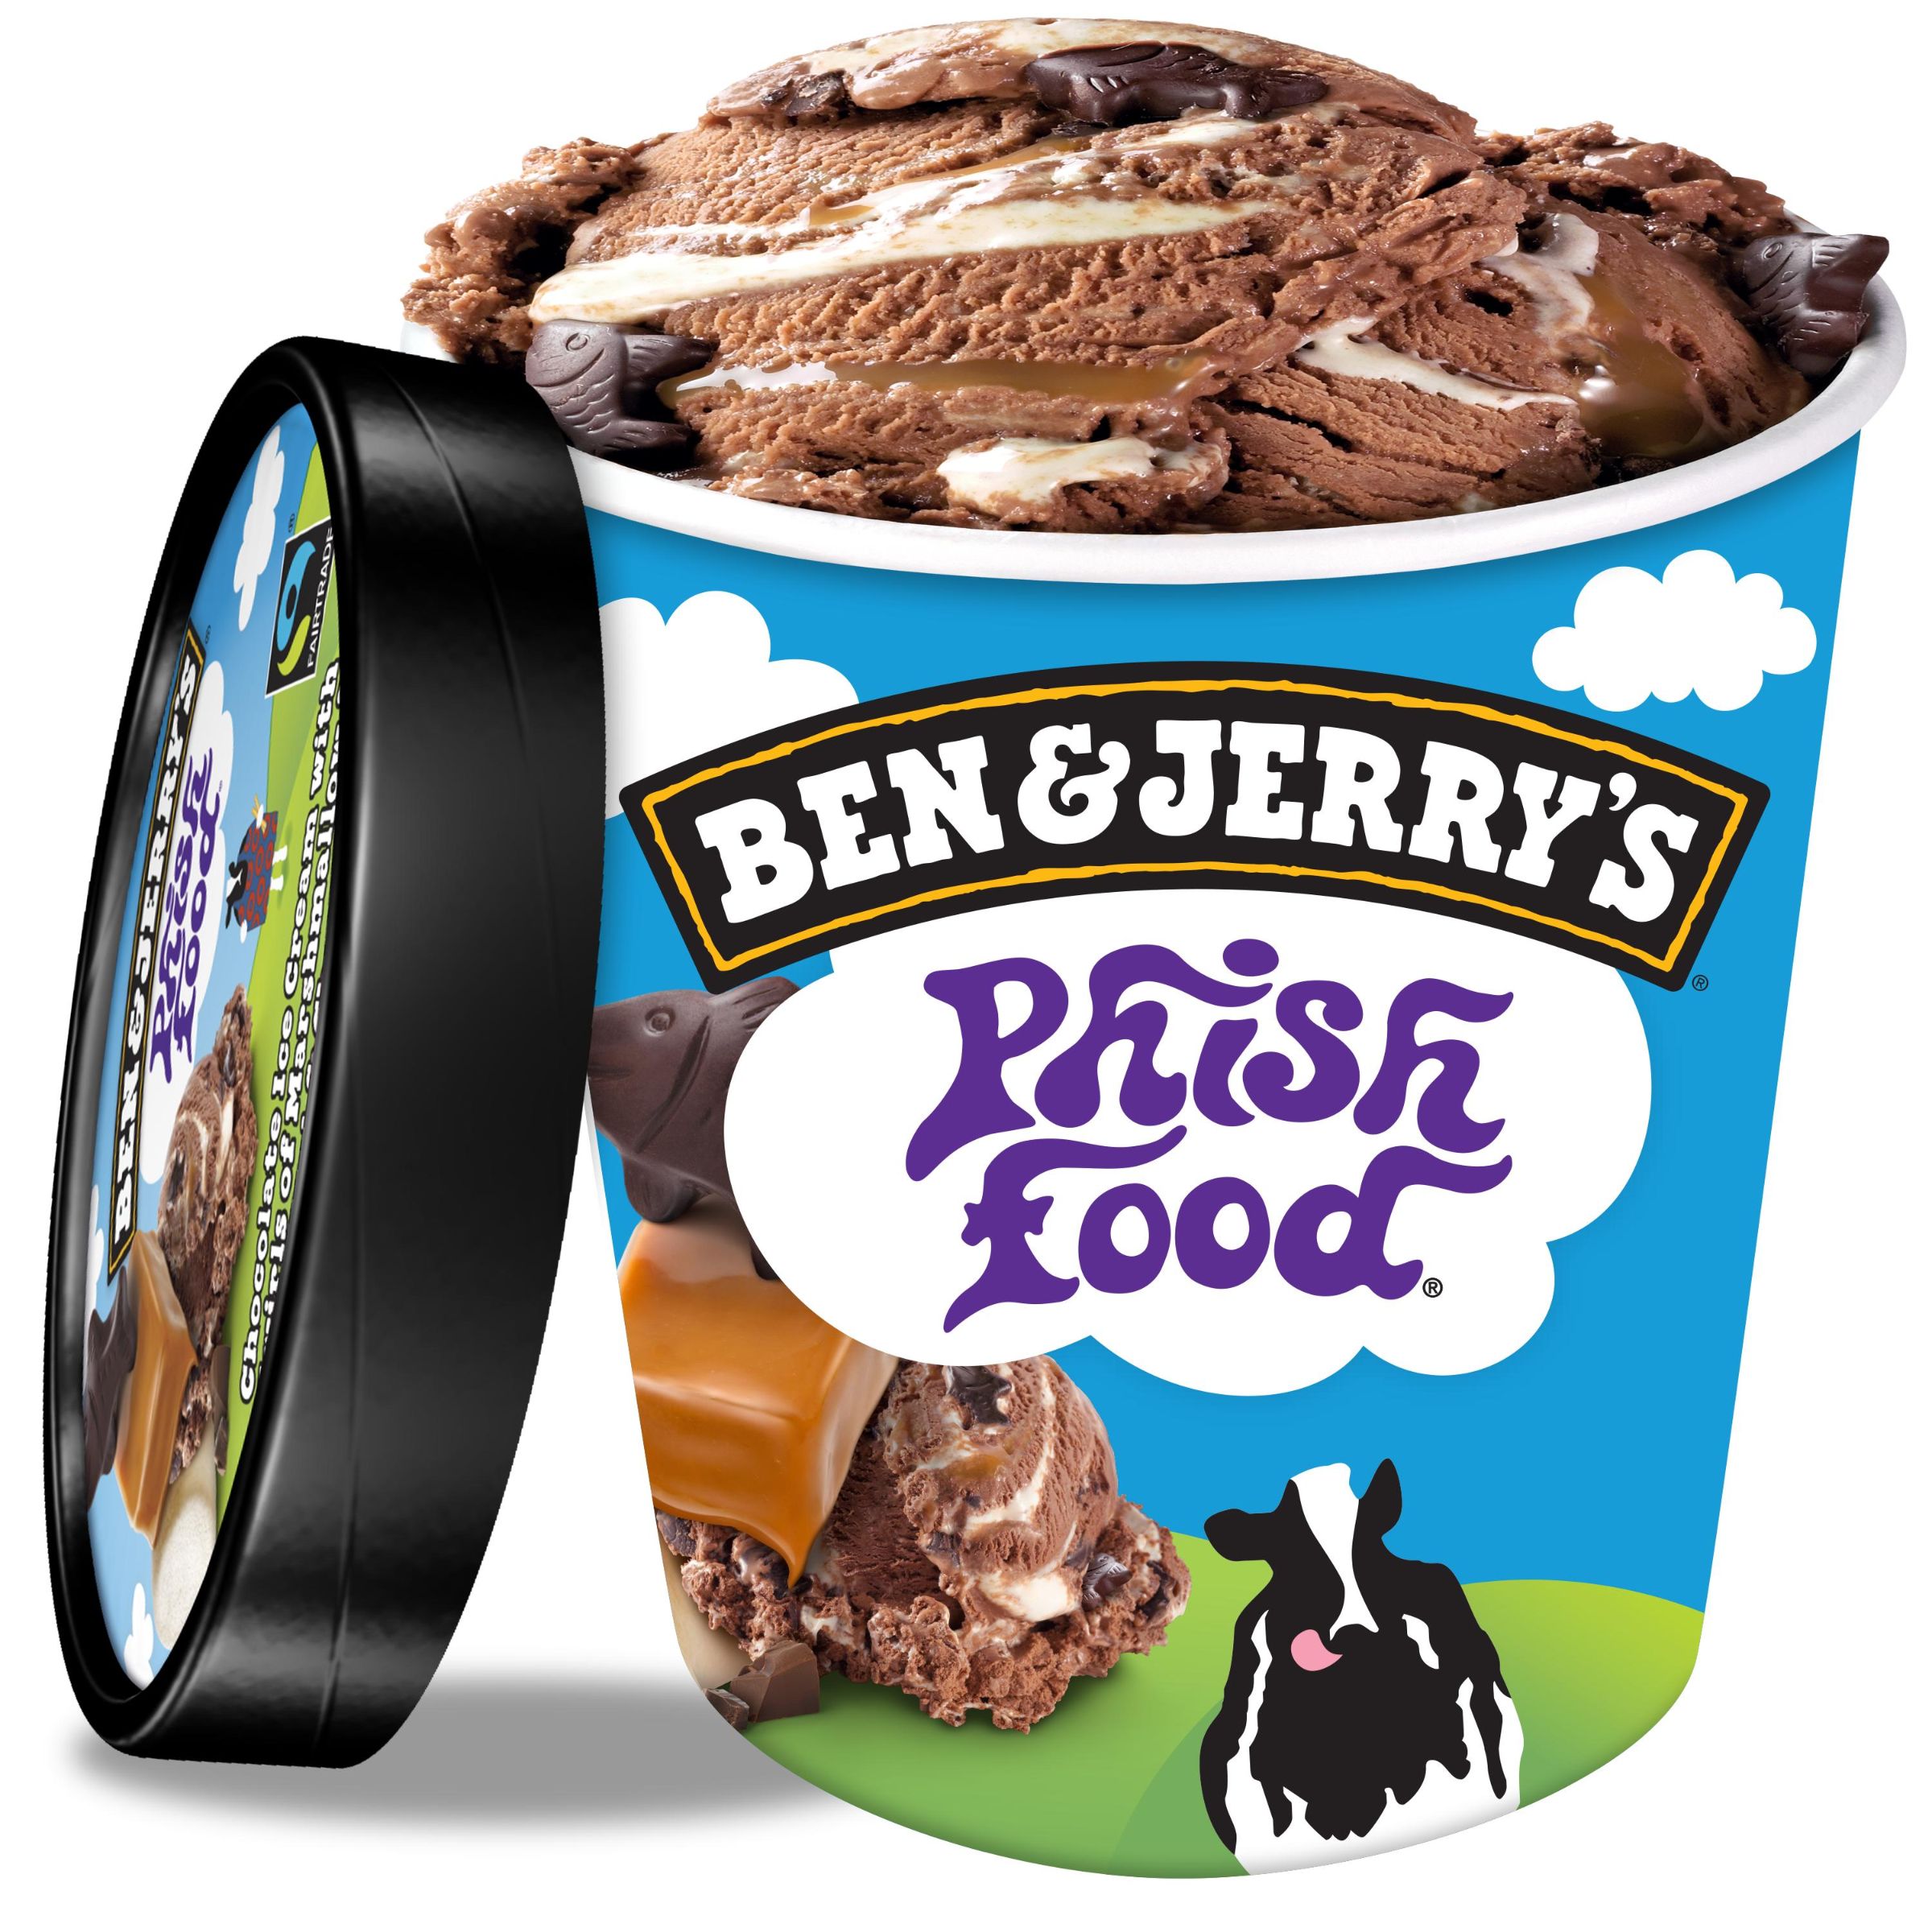 Ben and jerry's oh canada